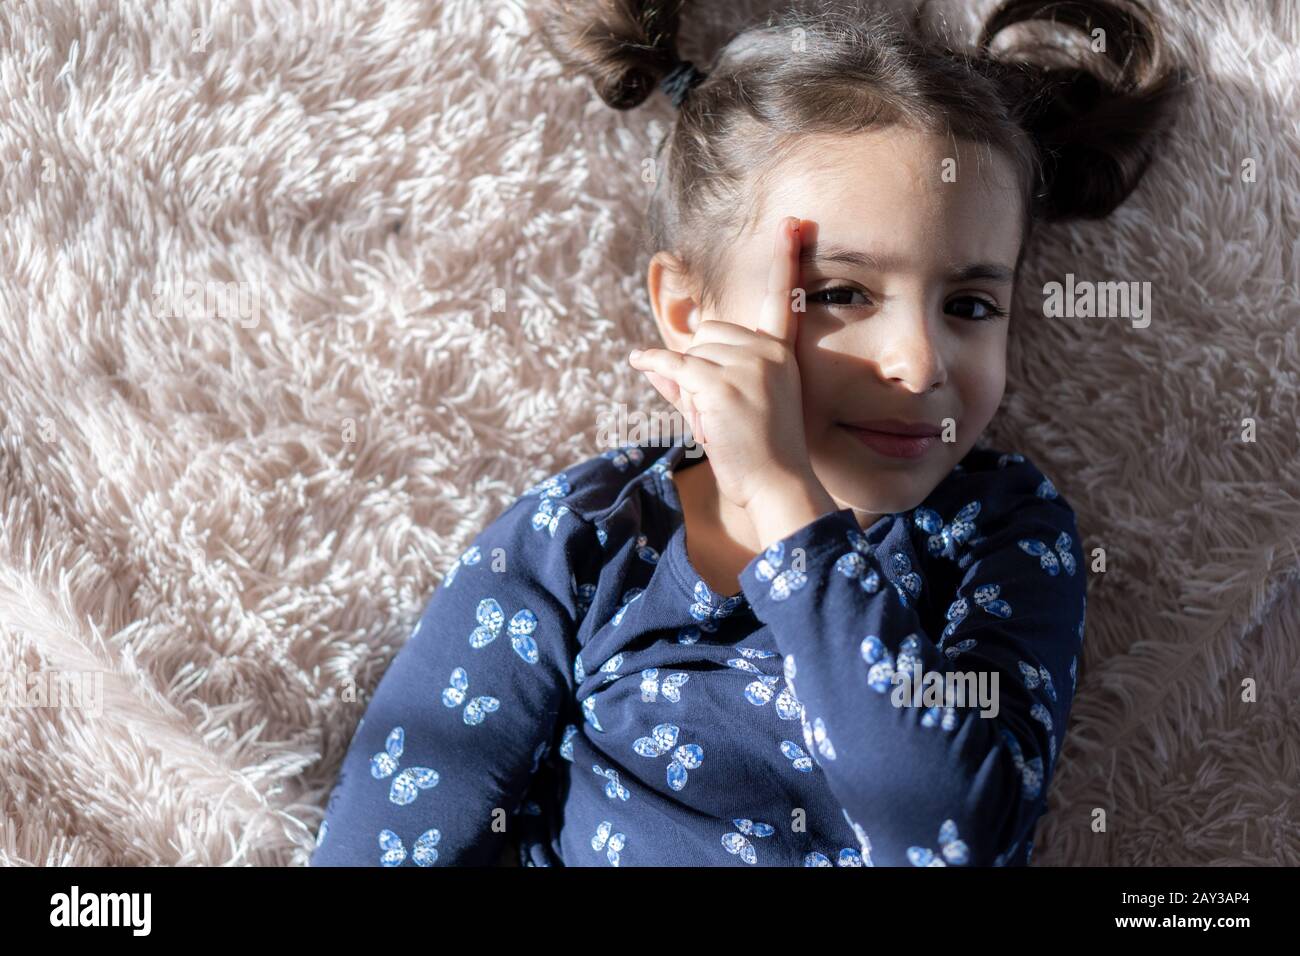 Middle Eastern young cute girl lies on a bright bed and closes her eyes with her finger from the sun. Persian swarthy girl on the bed. Middle Eastern Stock Photo